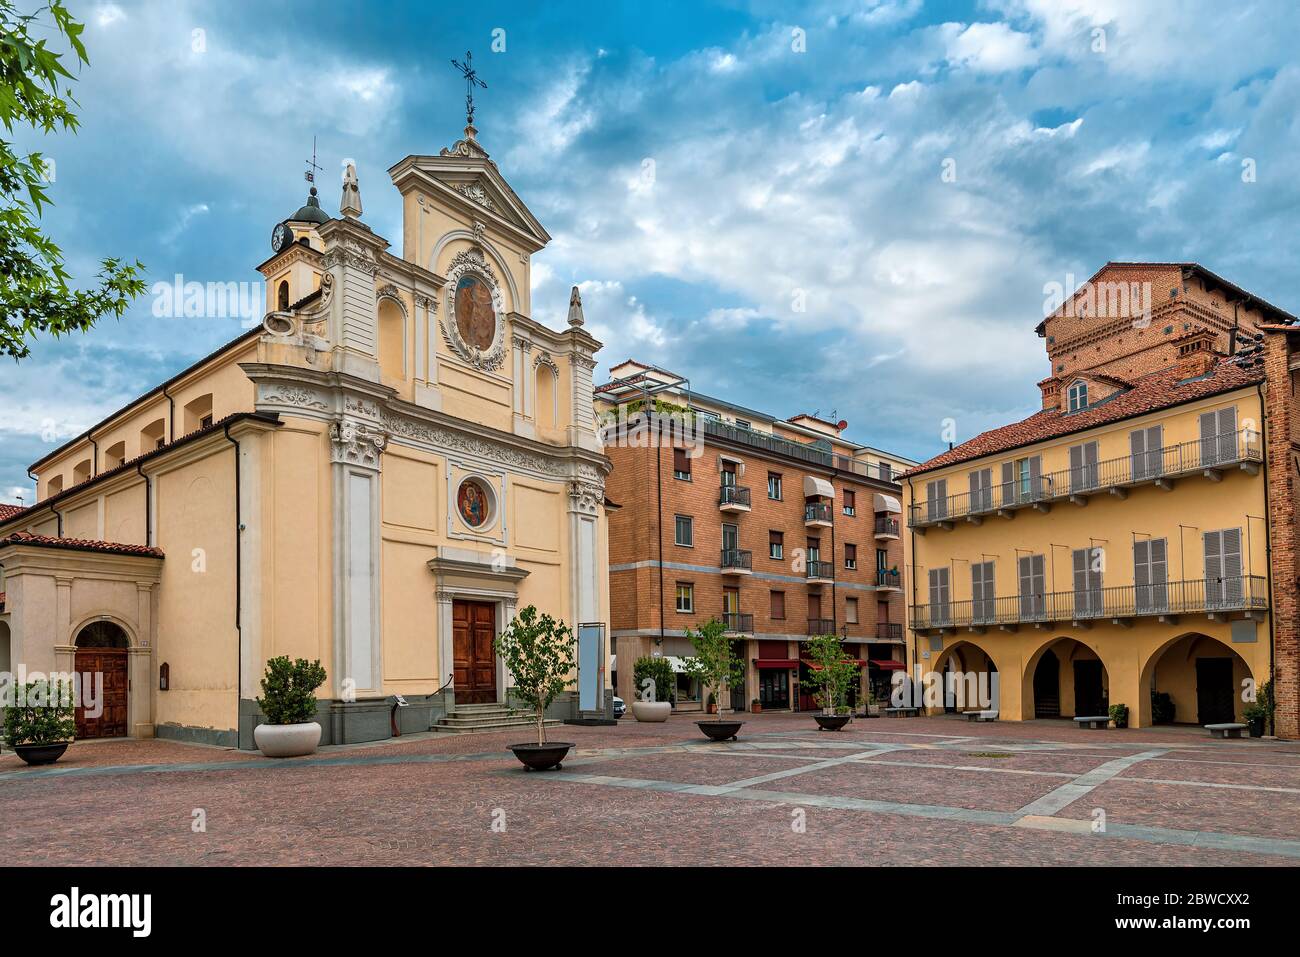 Catholic church and historic house on small town square under cloudy sky in Alba, Piedmont, Northern Italy. Stock Photo